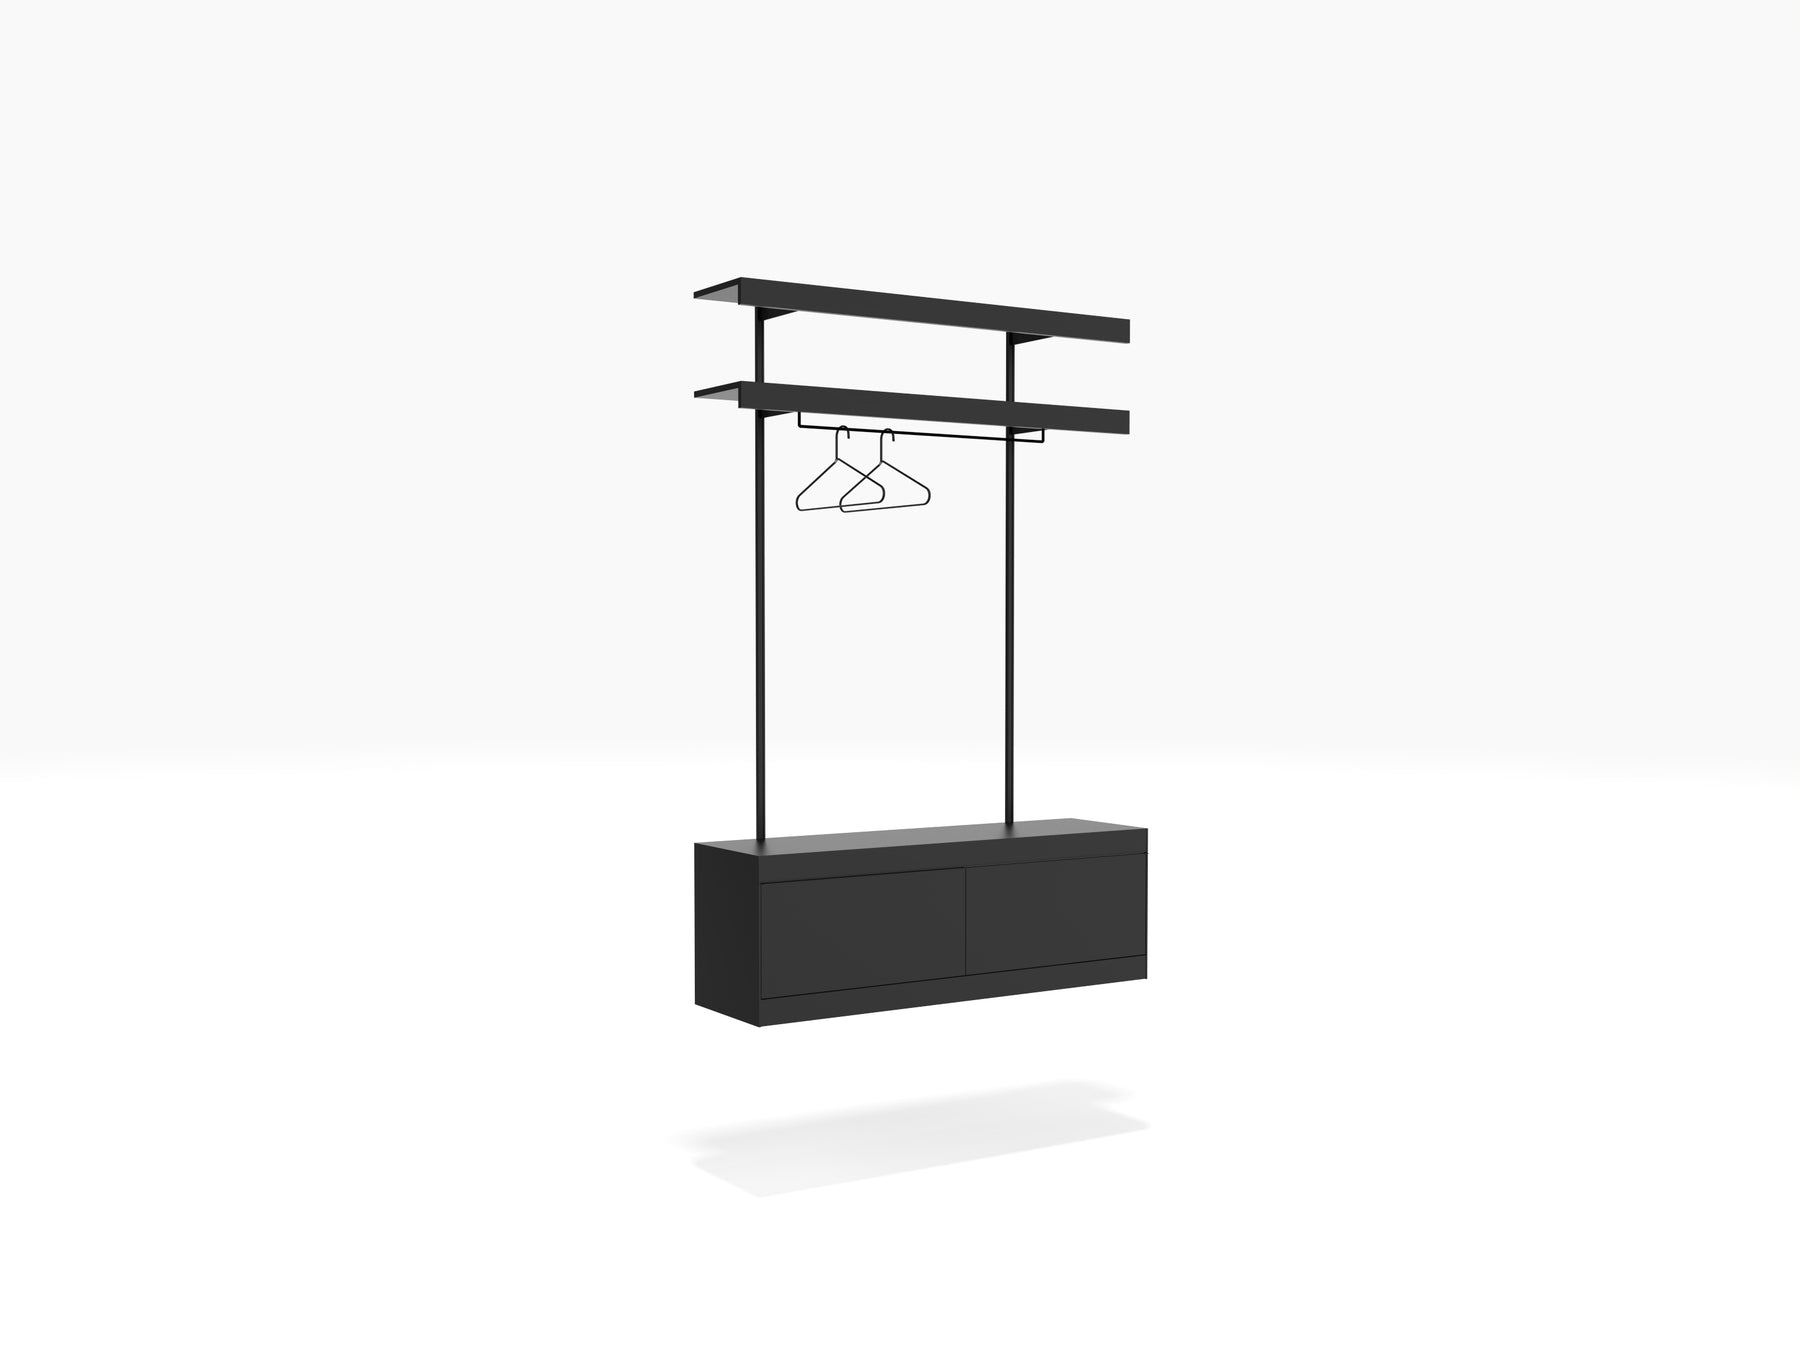 Open wardrobe shelving system in black with clothes rail